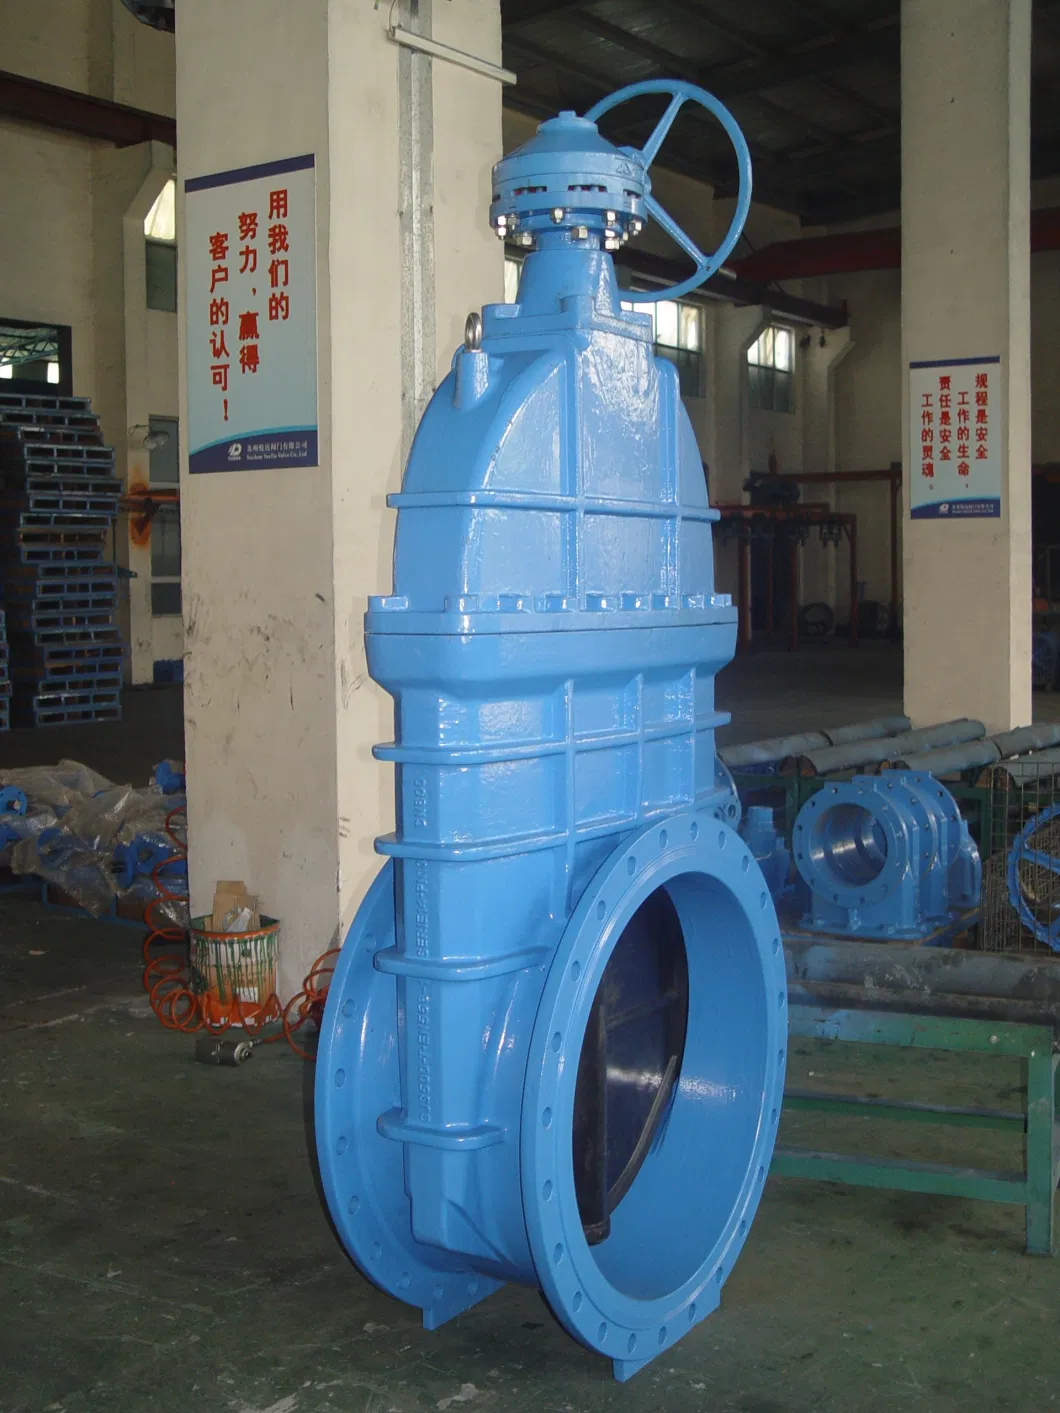 Double Flange Resilient Seated Gate Valve with Gearbox Expory Coating